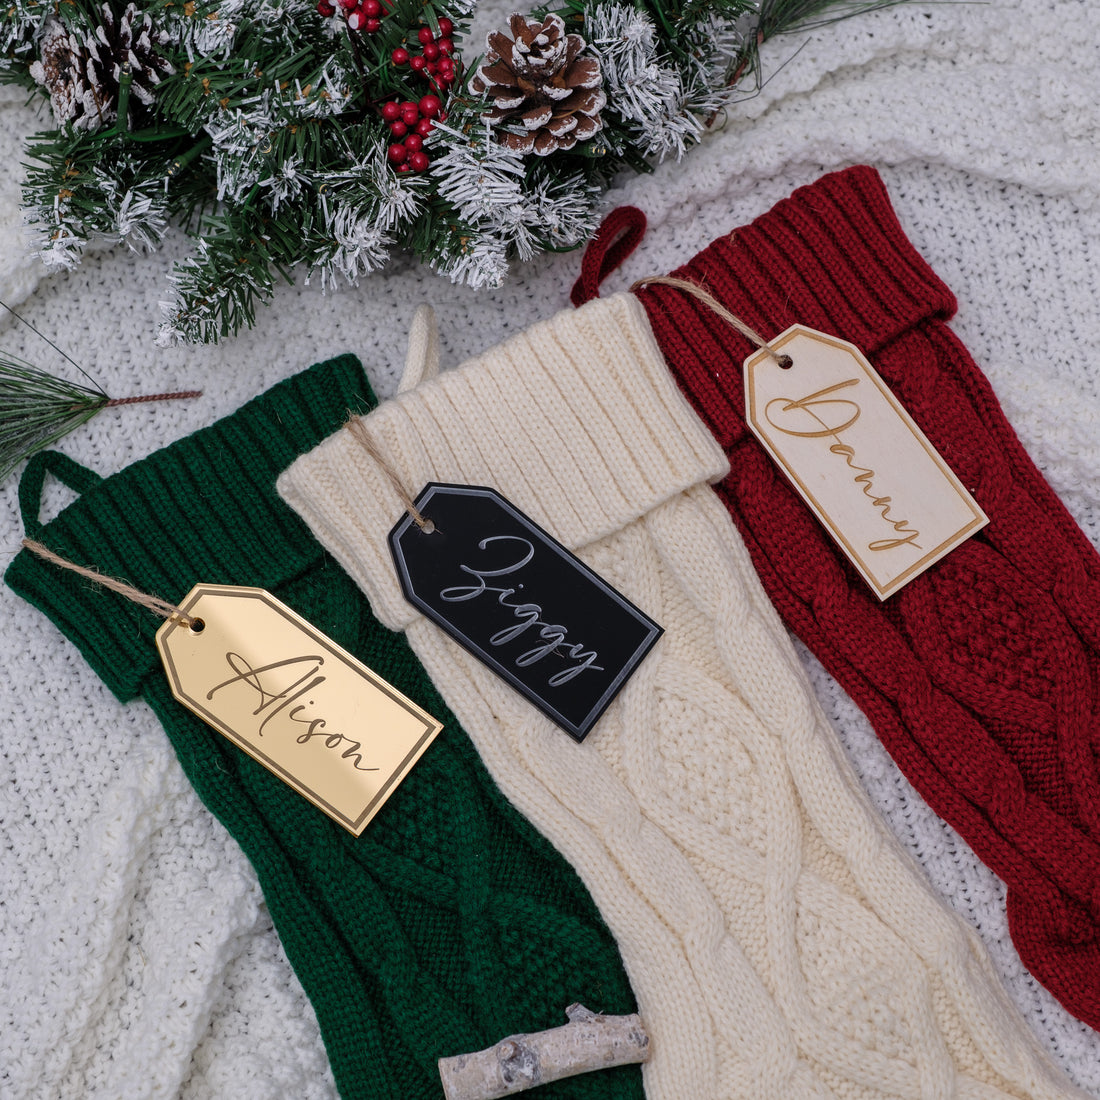 Knitted Stockings with Name Tags